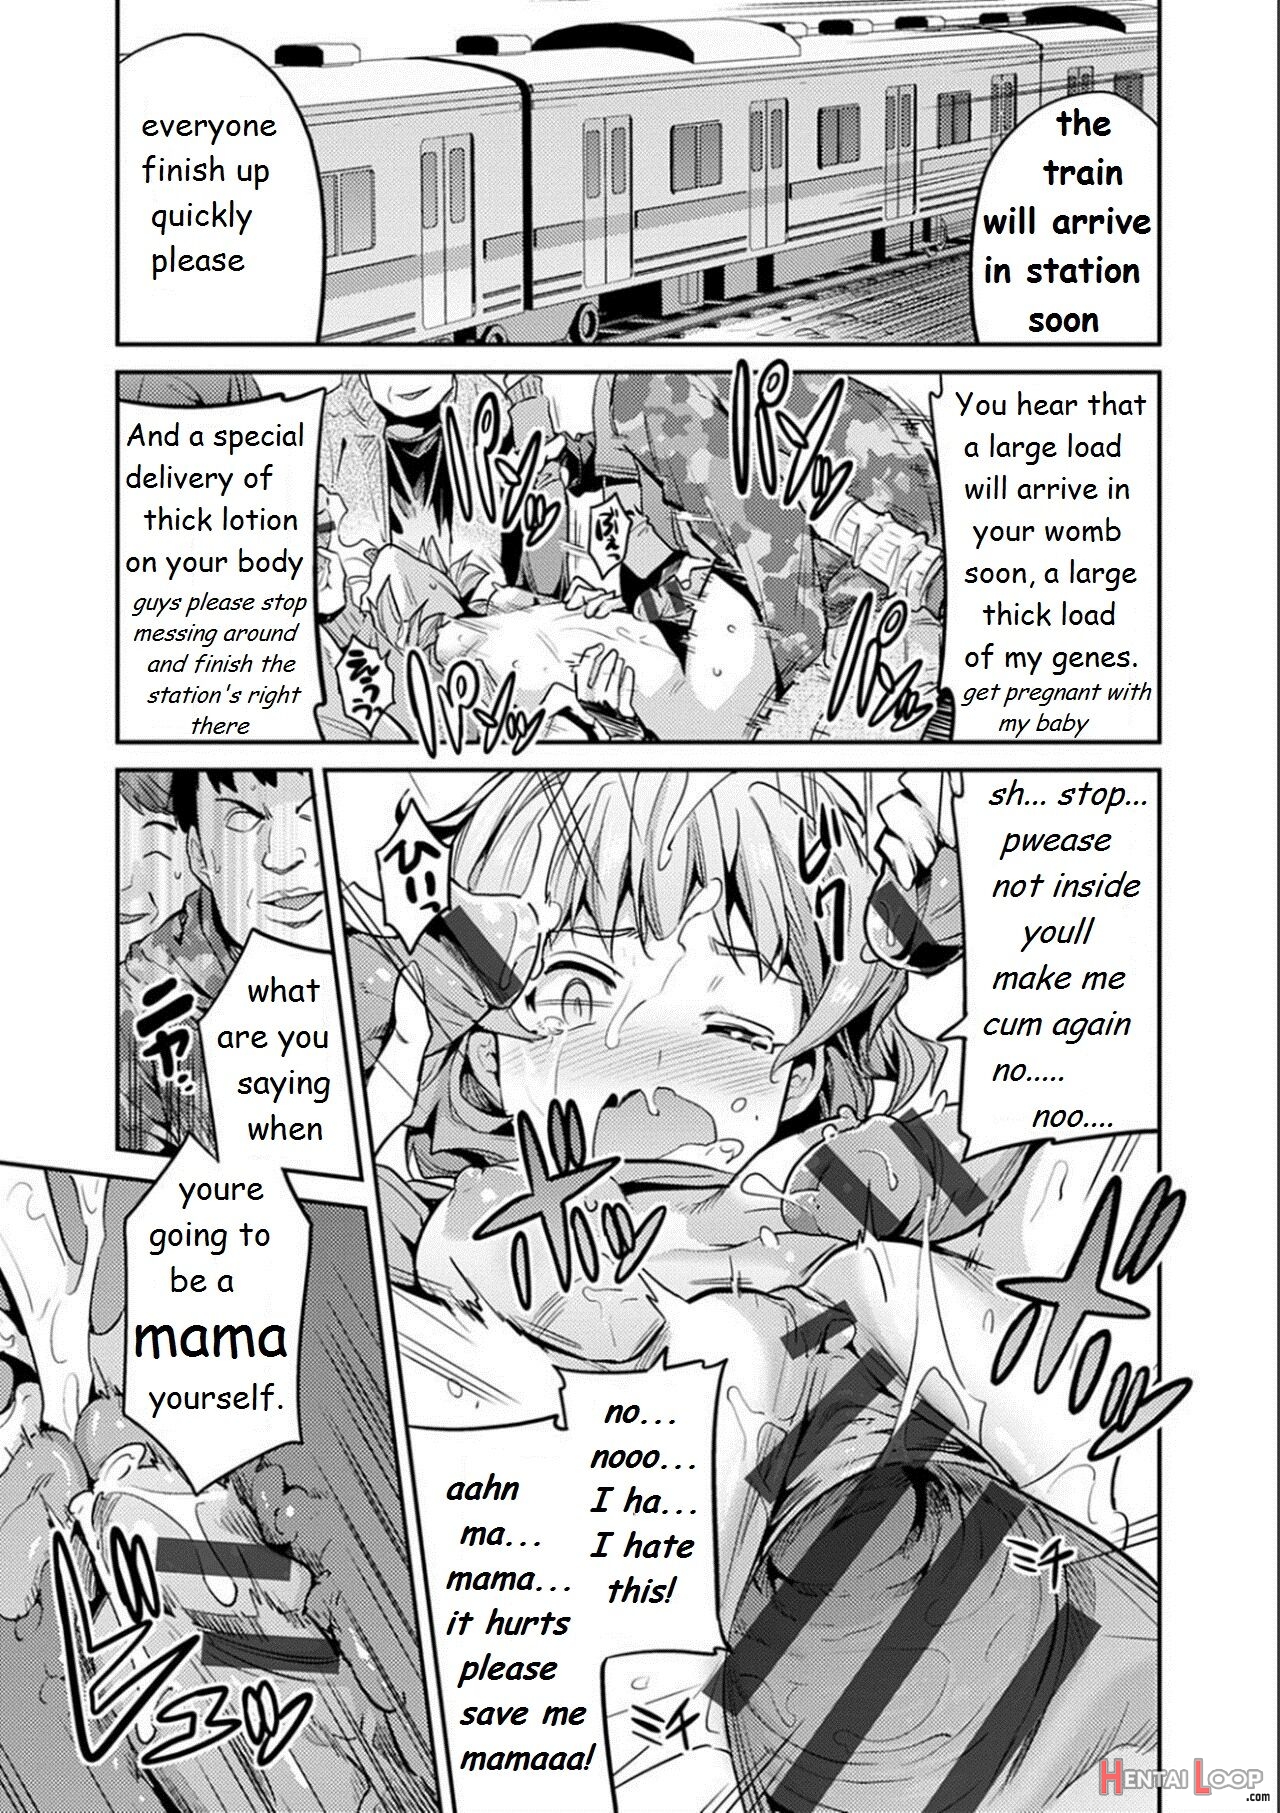 The Girl Who Cried Molester Kyousei Tanetsuke Express - Forced Seeding Express 1st Story page 22